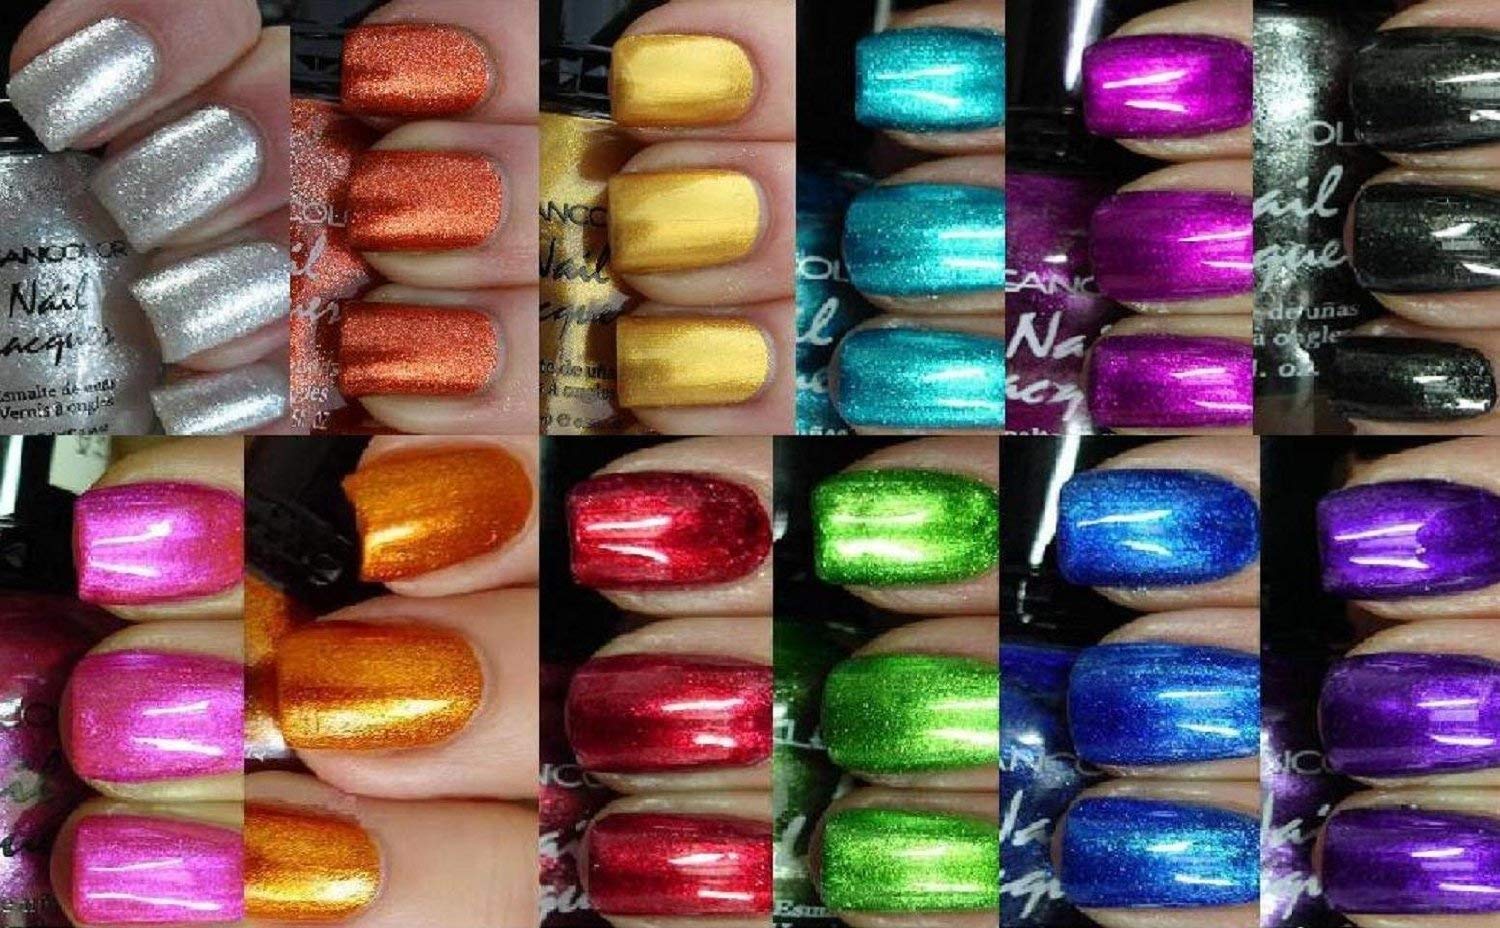 Kleancolor Nail Polish - Awesome Metallic Full Size Lacquer (Set of 12 Pieces)